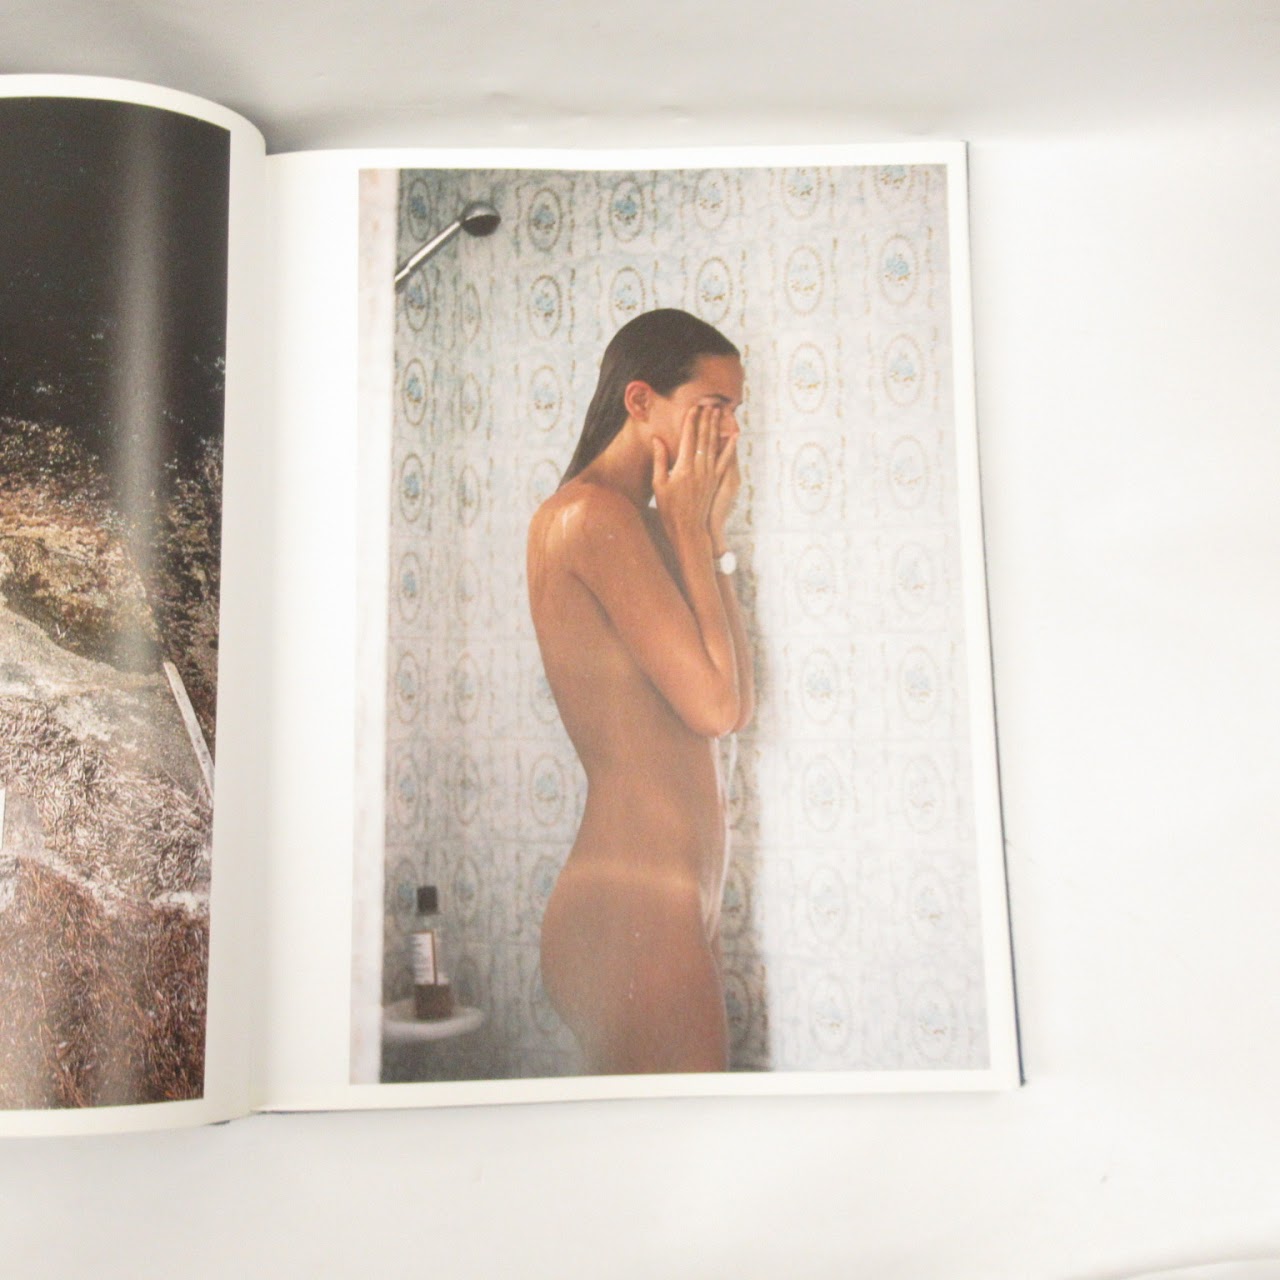 Henrik Purienne RARE 'Holiday: Birds of a Feather Flock Together' Photography Book